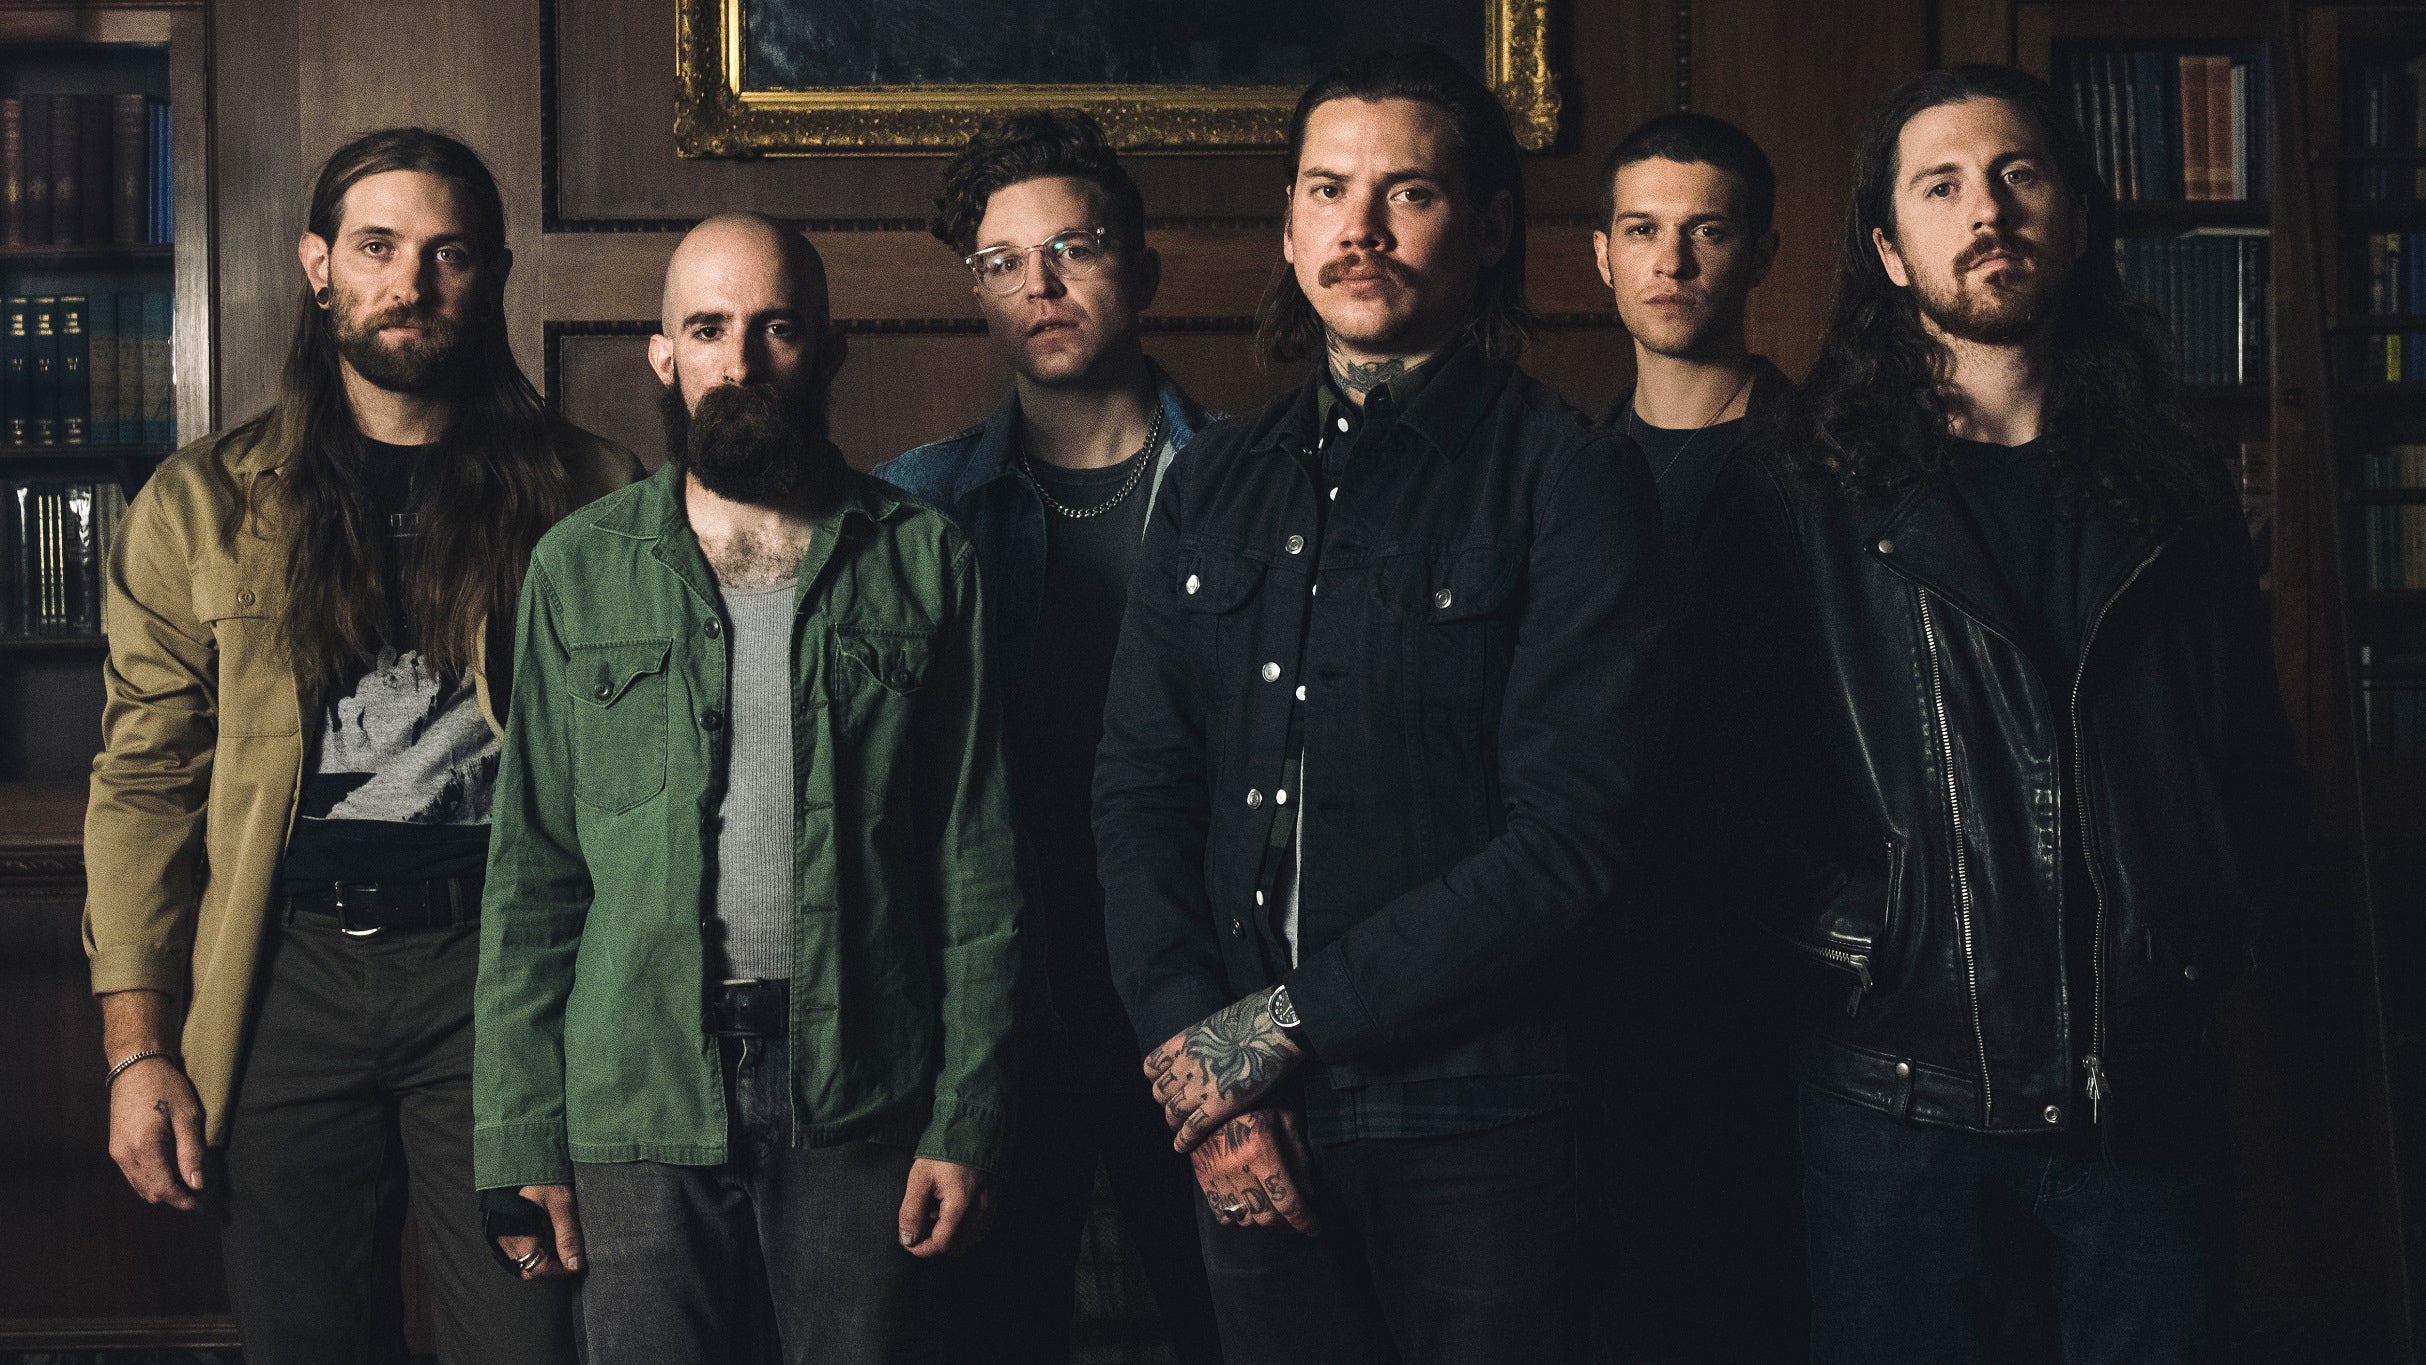 The Devil Wears Prada & Fit For A King: METALCORE DROPOUTS in Cleveland promo photo for BBM presale offer code